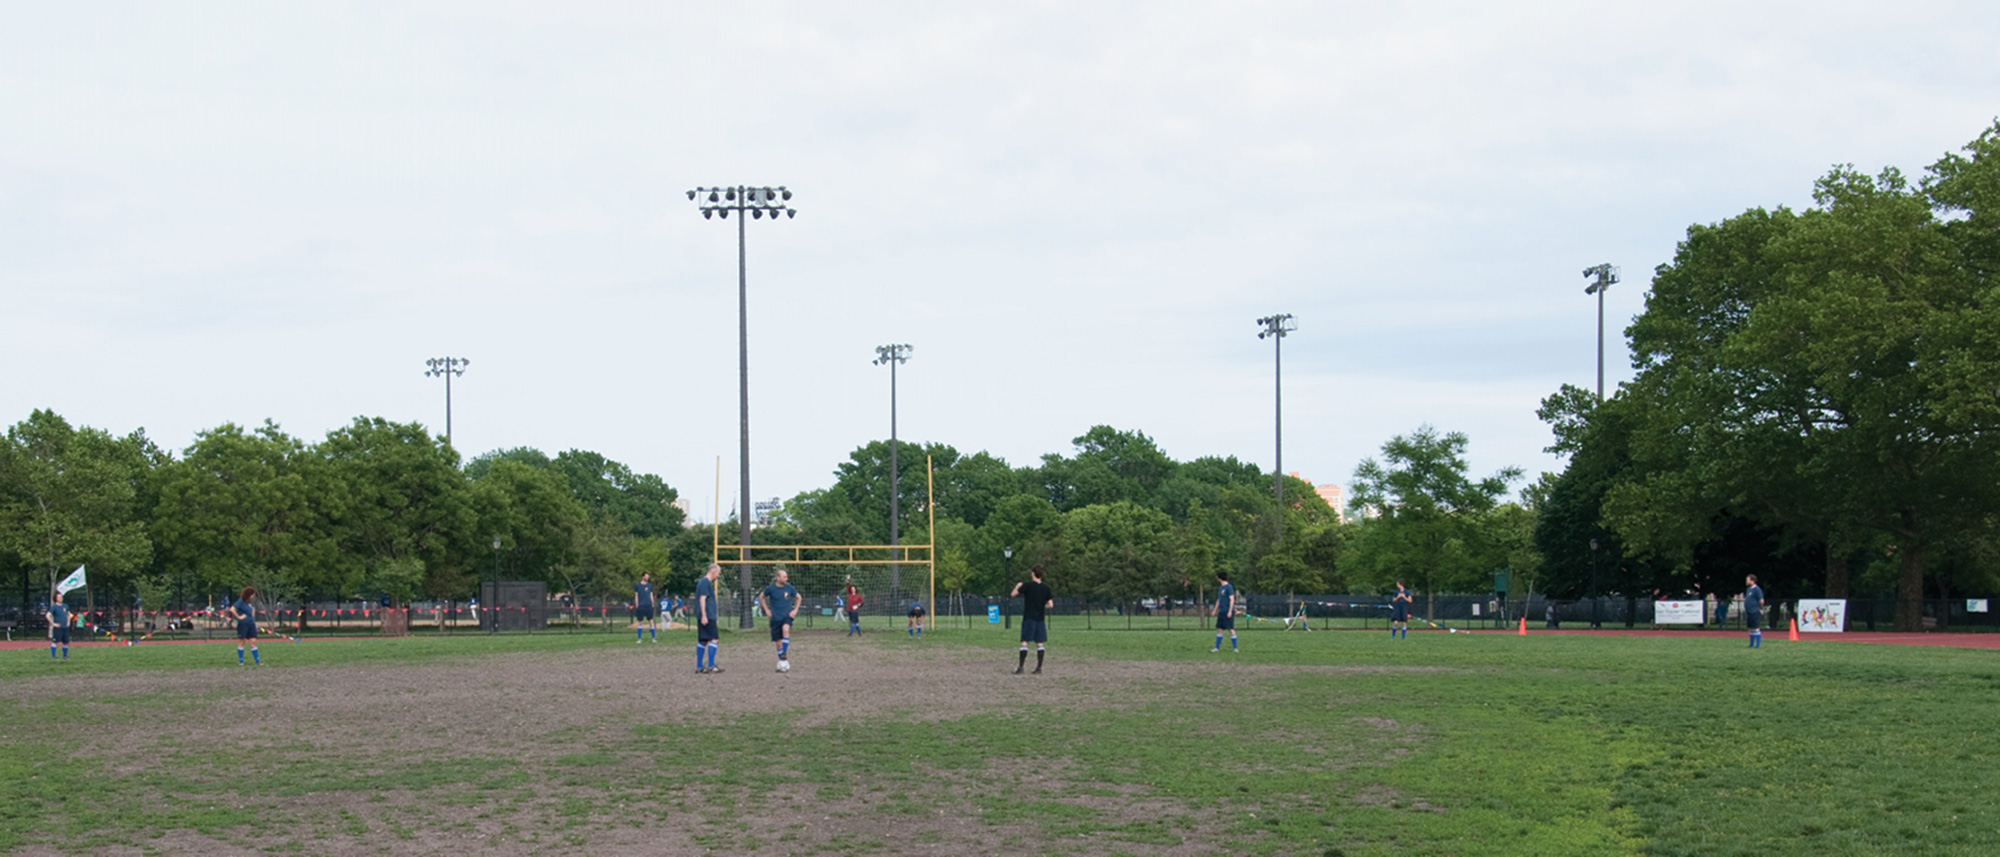 A photograph of Cabinet Soccer Club on the field waiting for their opponents to arrive.